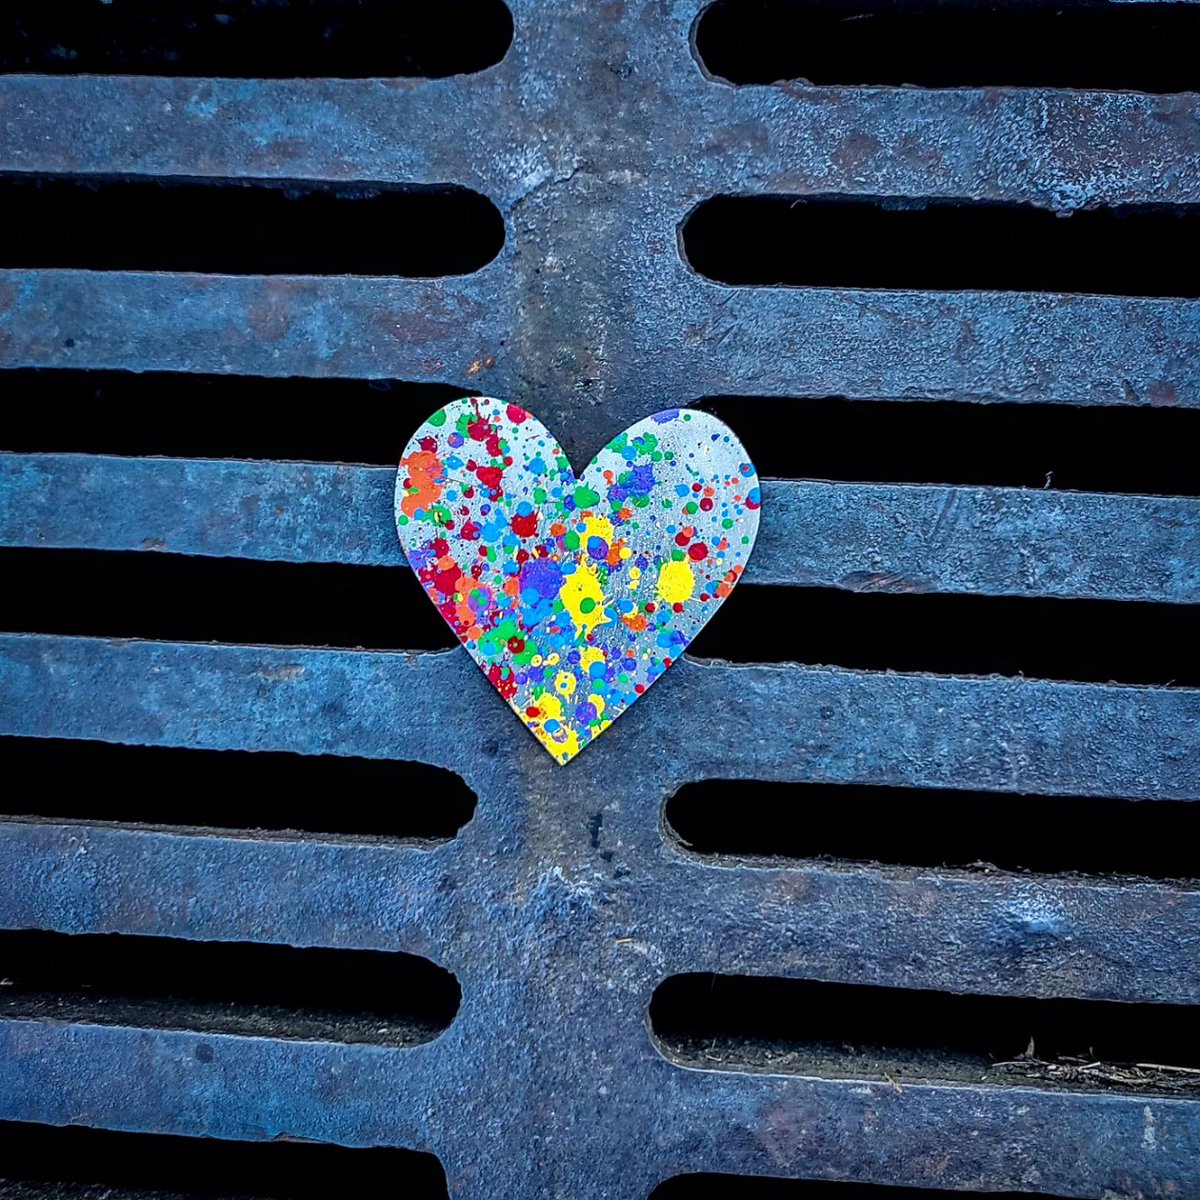 A drop.  Embrace differences not hate.  #love #unity #empathy #compassion #together #art #heart #streetphotography #vancouverwashington